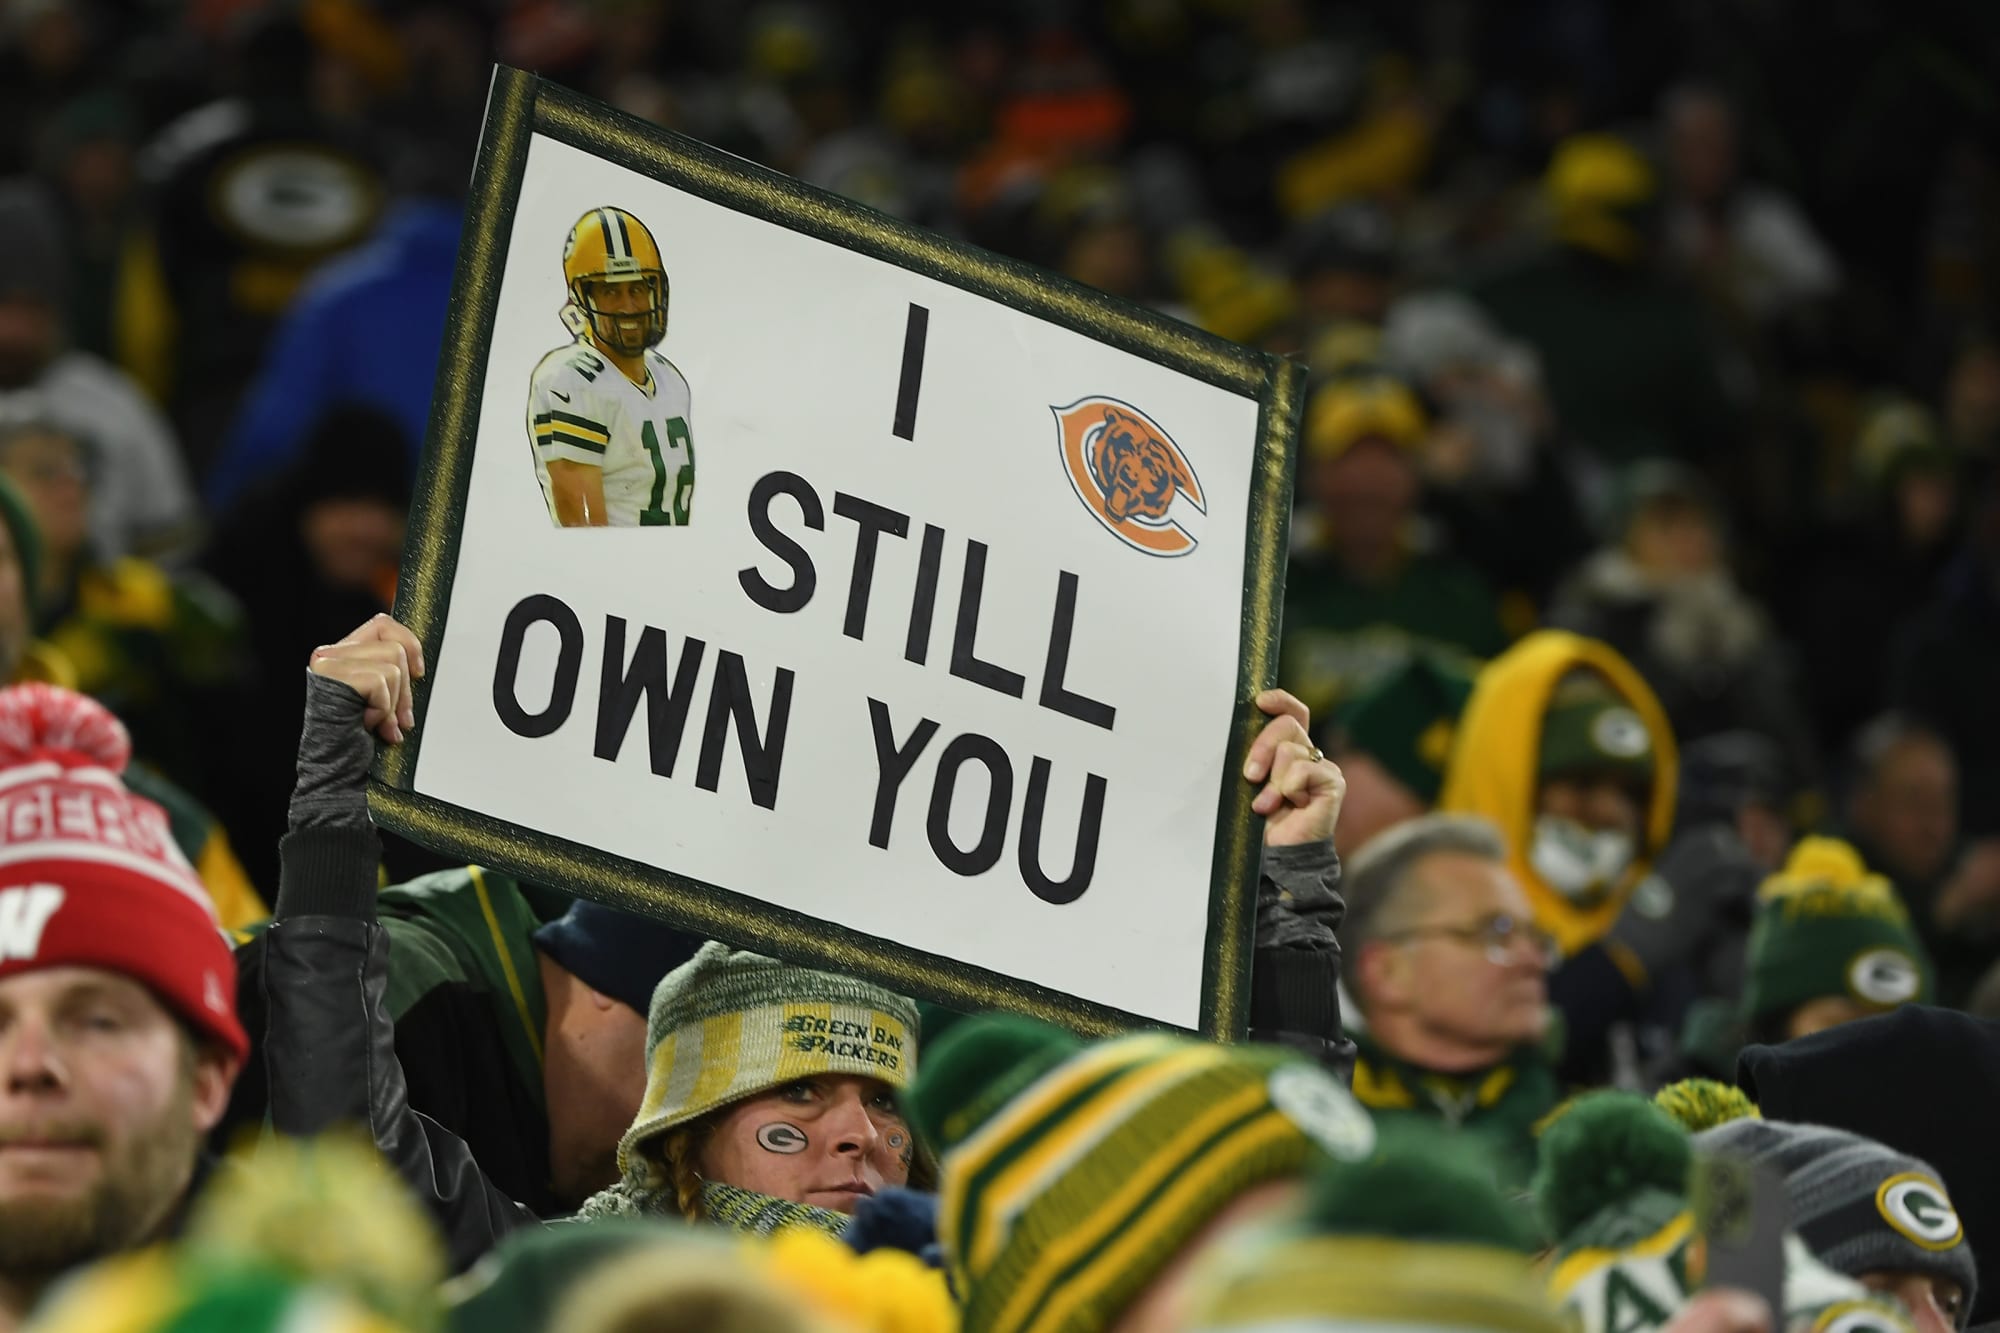 Dick Butkus’ Aaron Rodgers hate could come back to haunt Bears